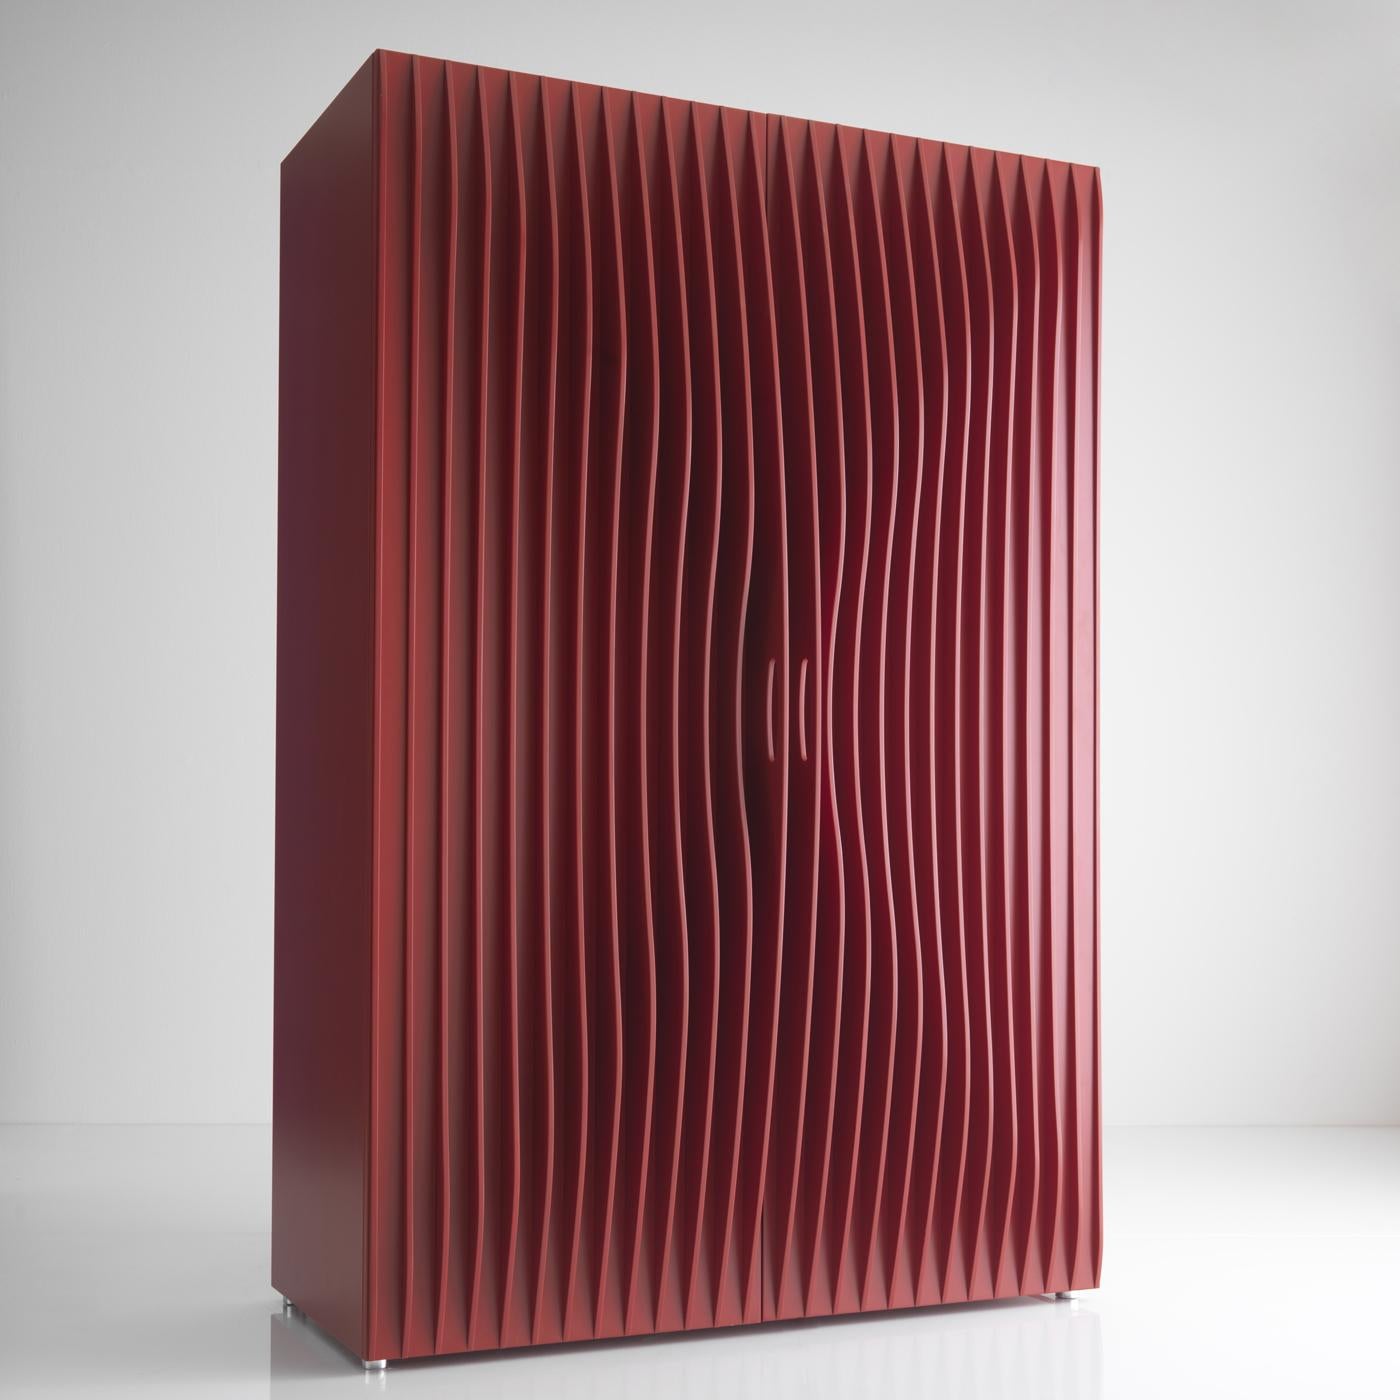 A sculptural piece of functional decor, this wardrobe boasts the dynamism and elegance typical of Karim Rashid's design. Frame, shelves, and doors are made of red-lacquered MDF, boasting a stunning ripple-effect. The interior is illuminated by LED